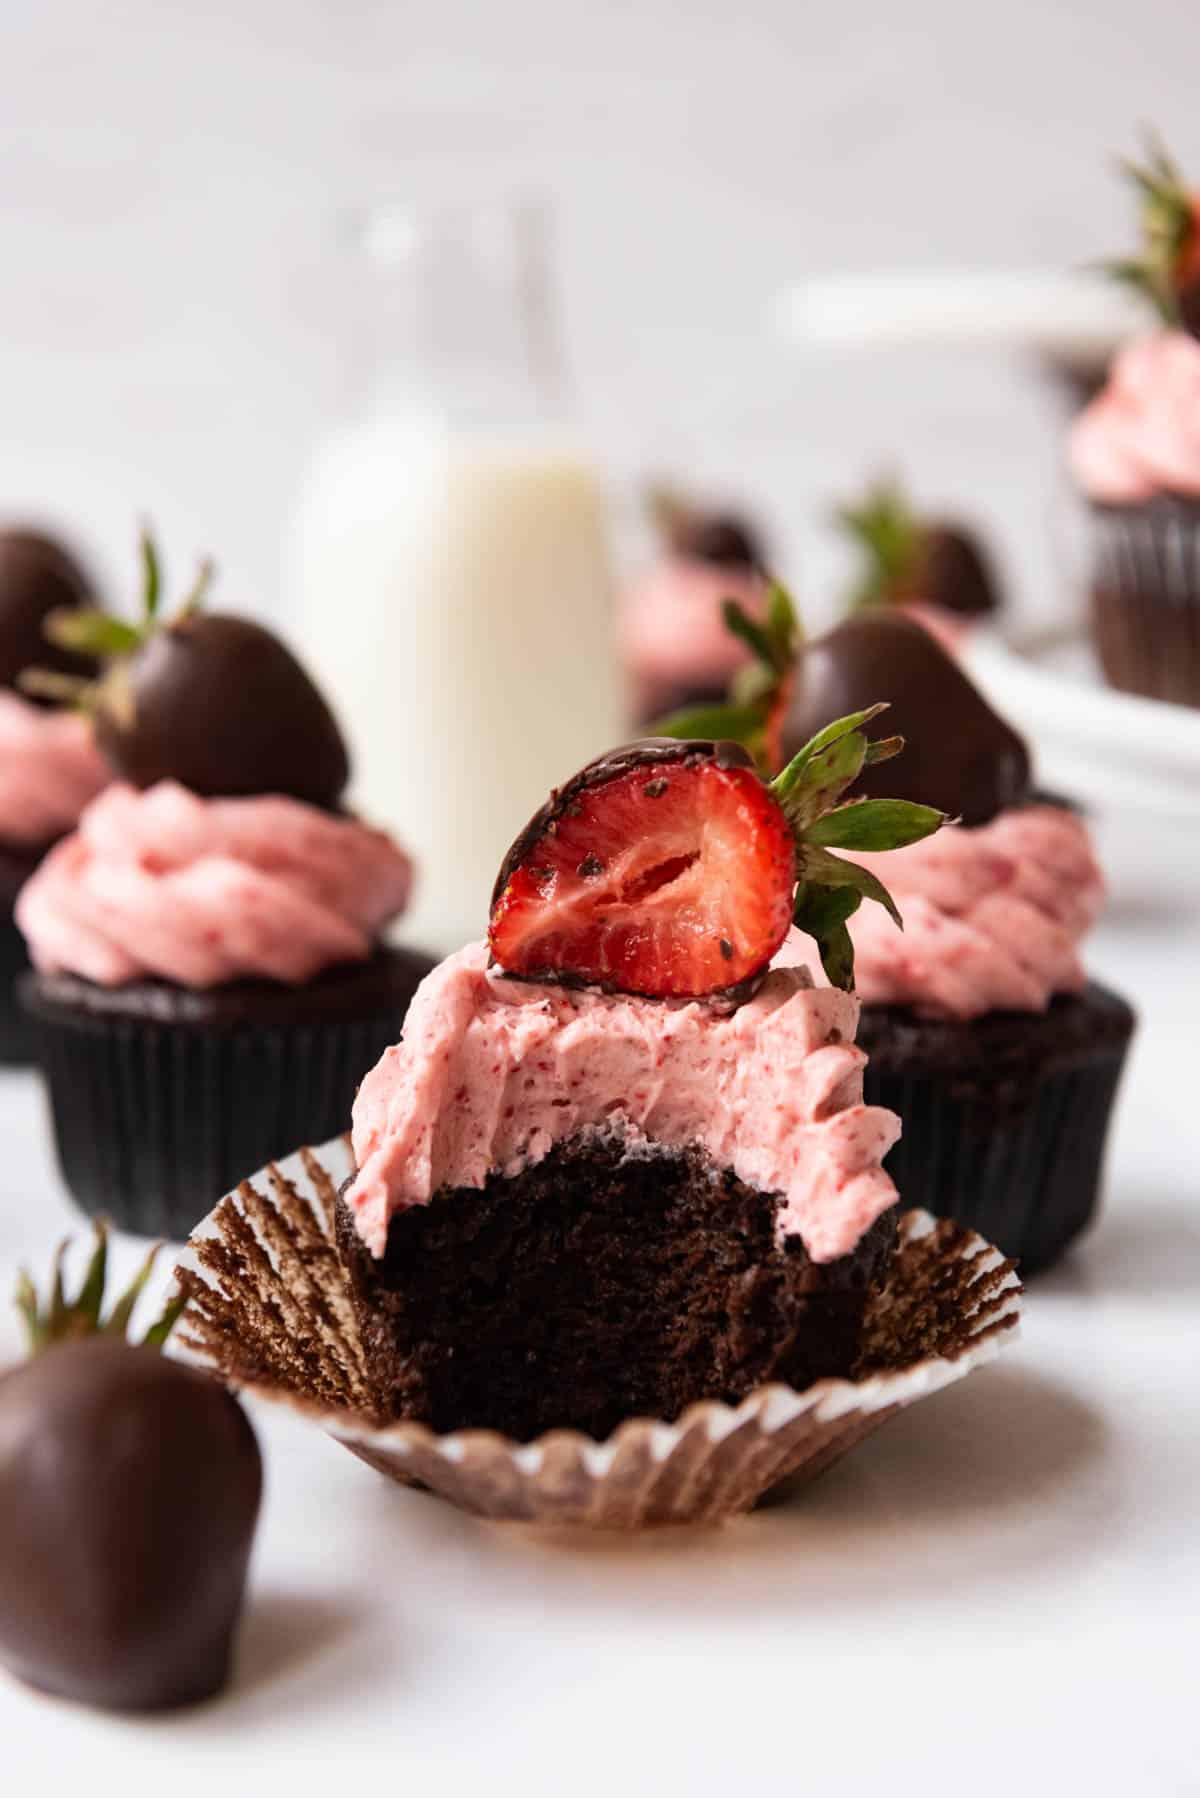 A chocolate covered strawberry cupcake with a bite taken out of it in front of more cupcakes and a bottle of milk.